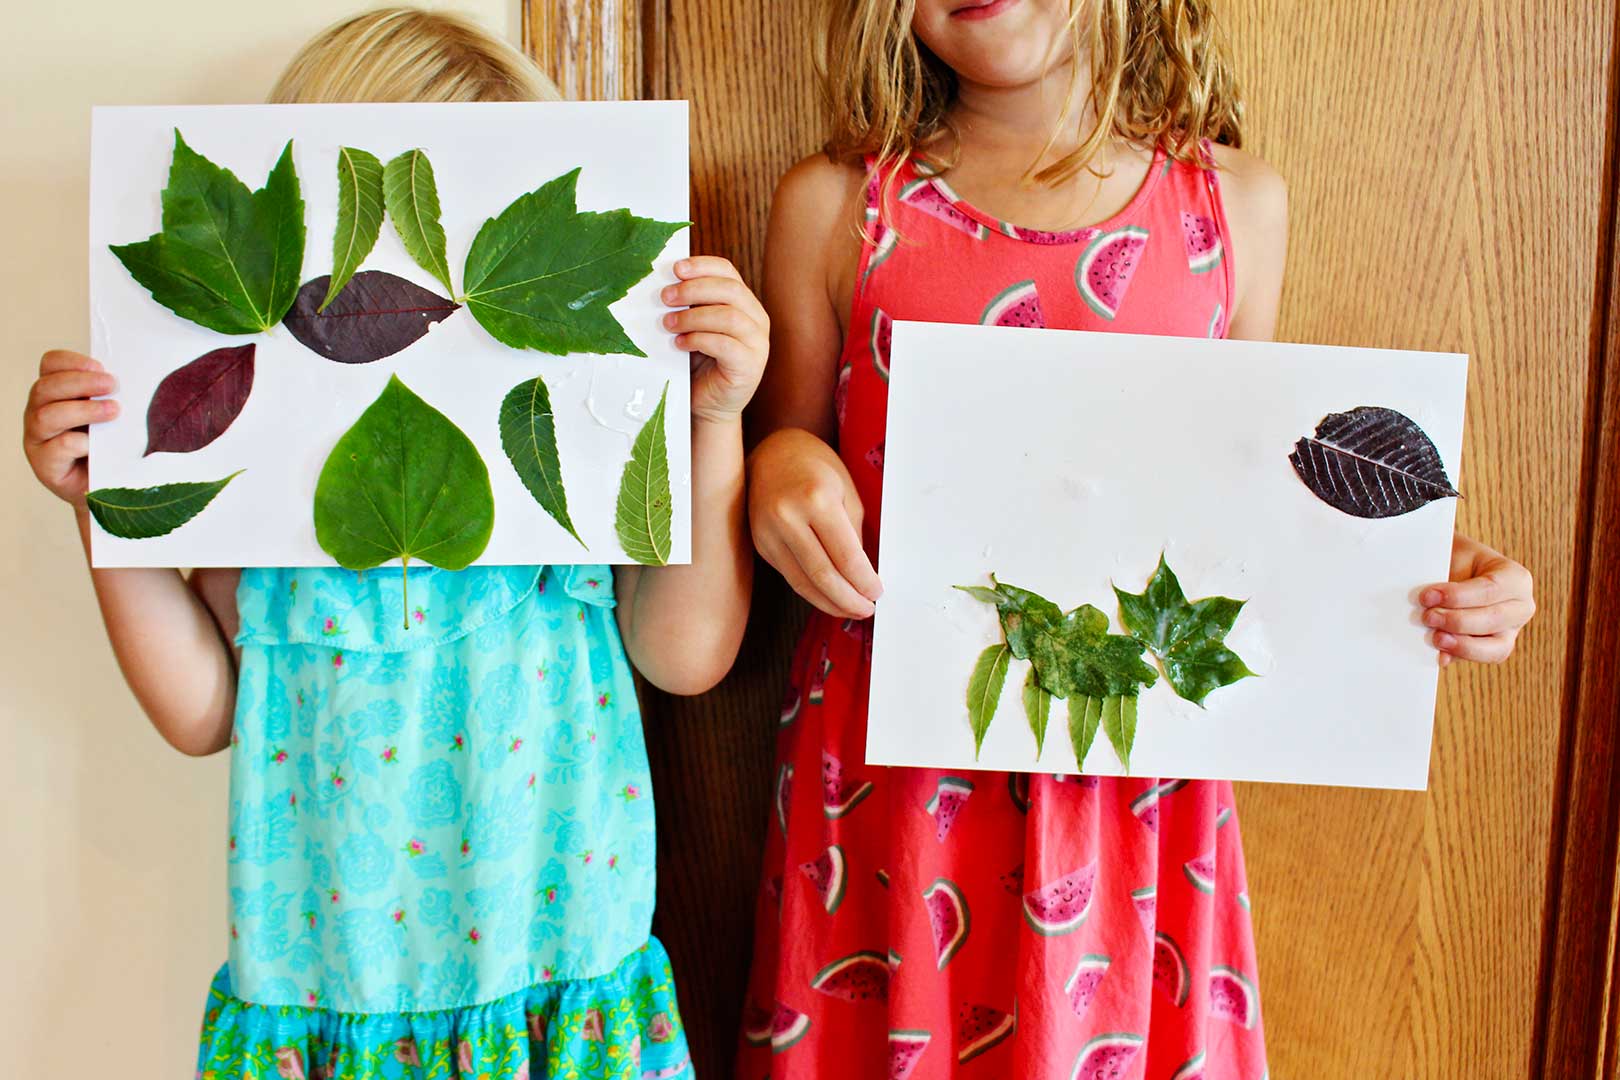 Two girls standing side by side showing the camera their leaf collage.